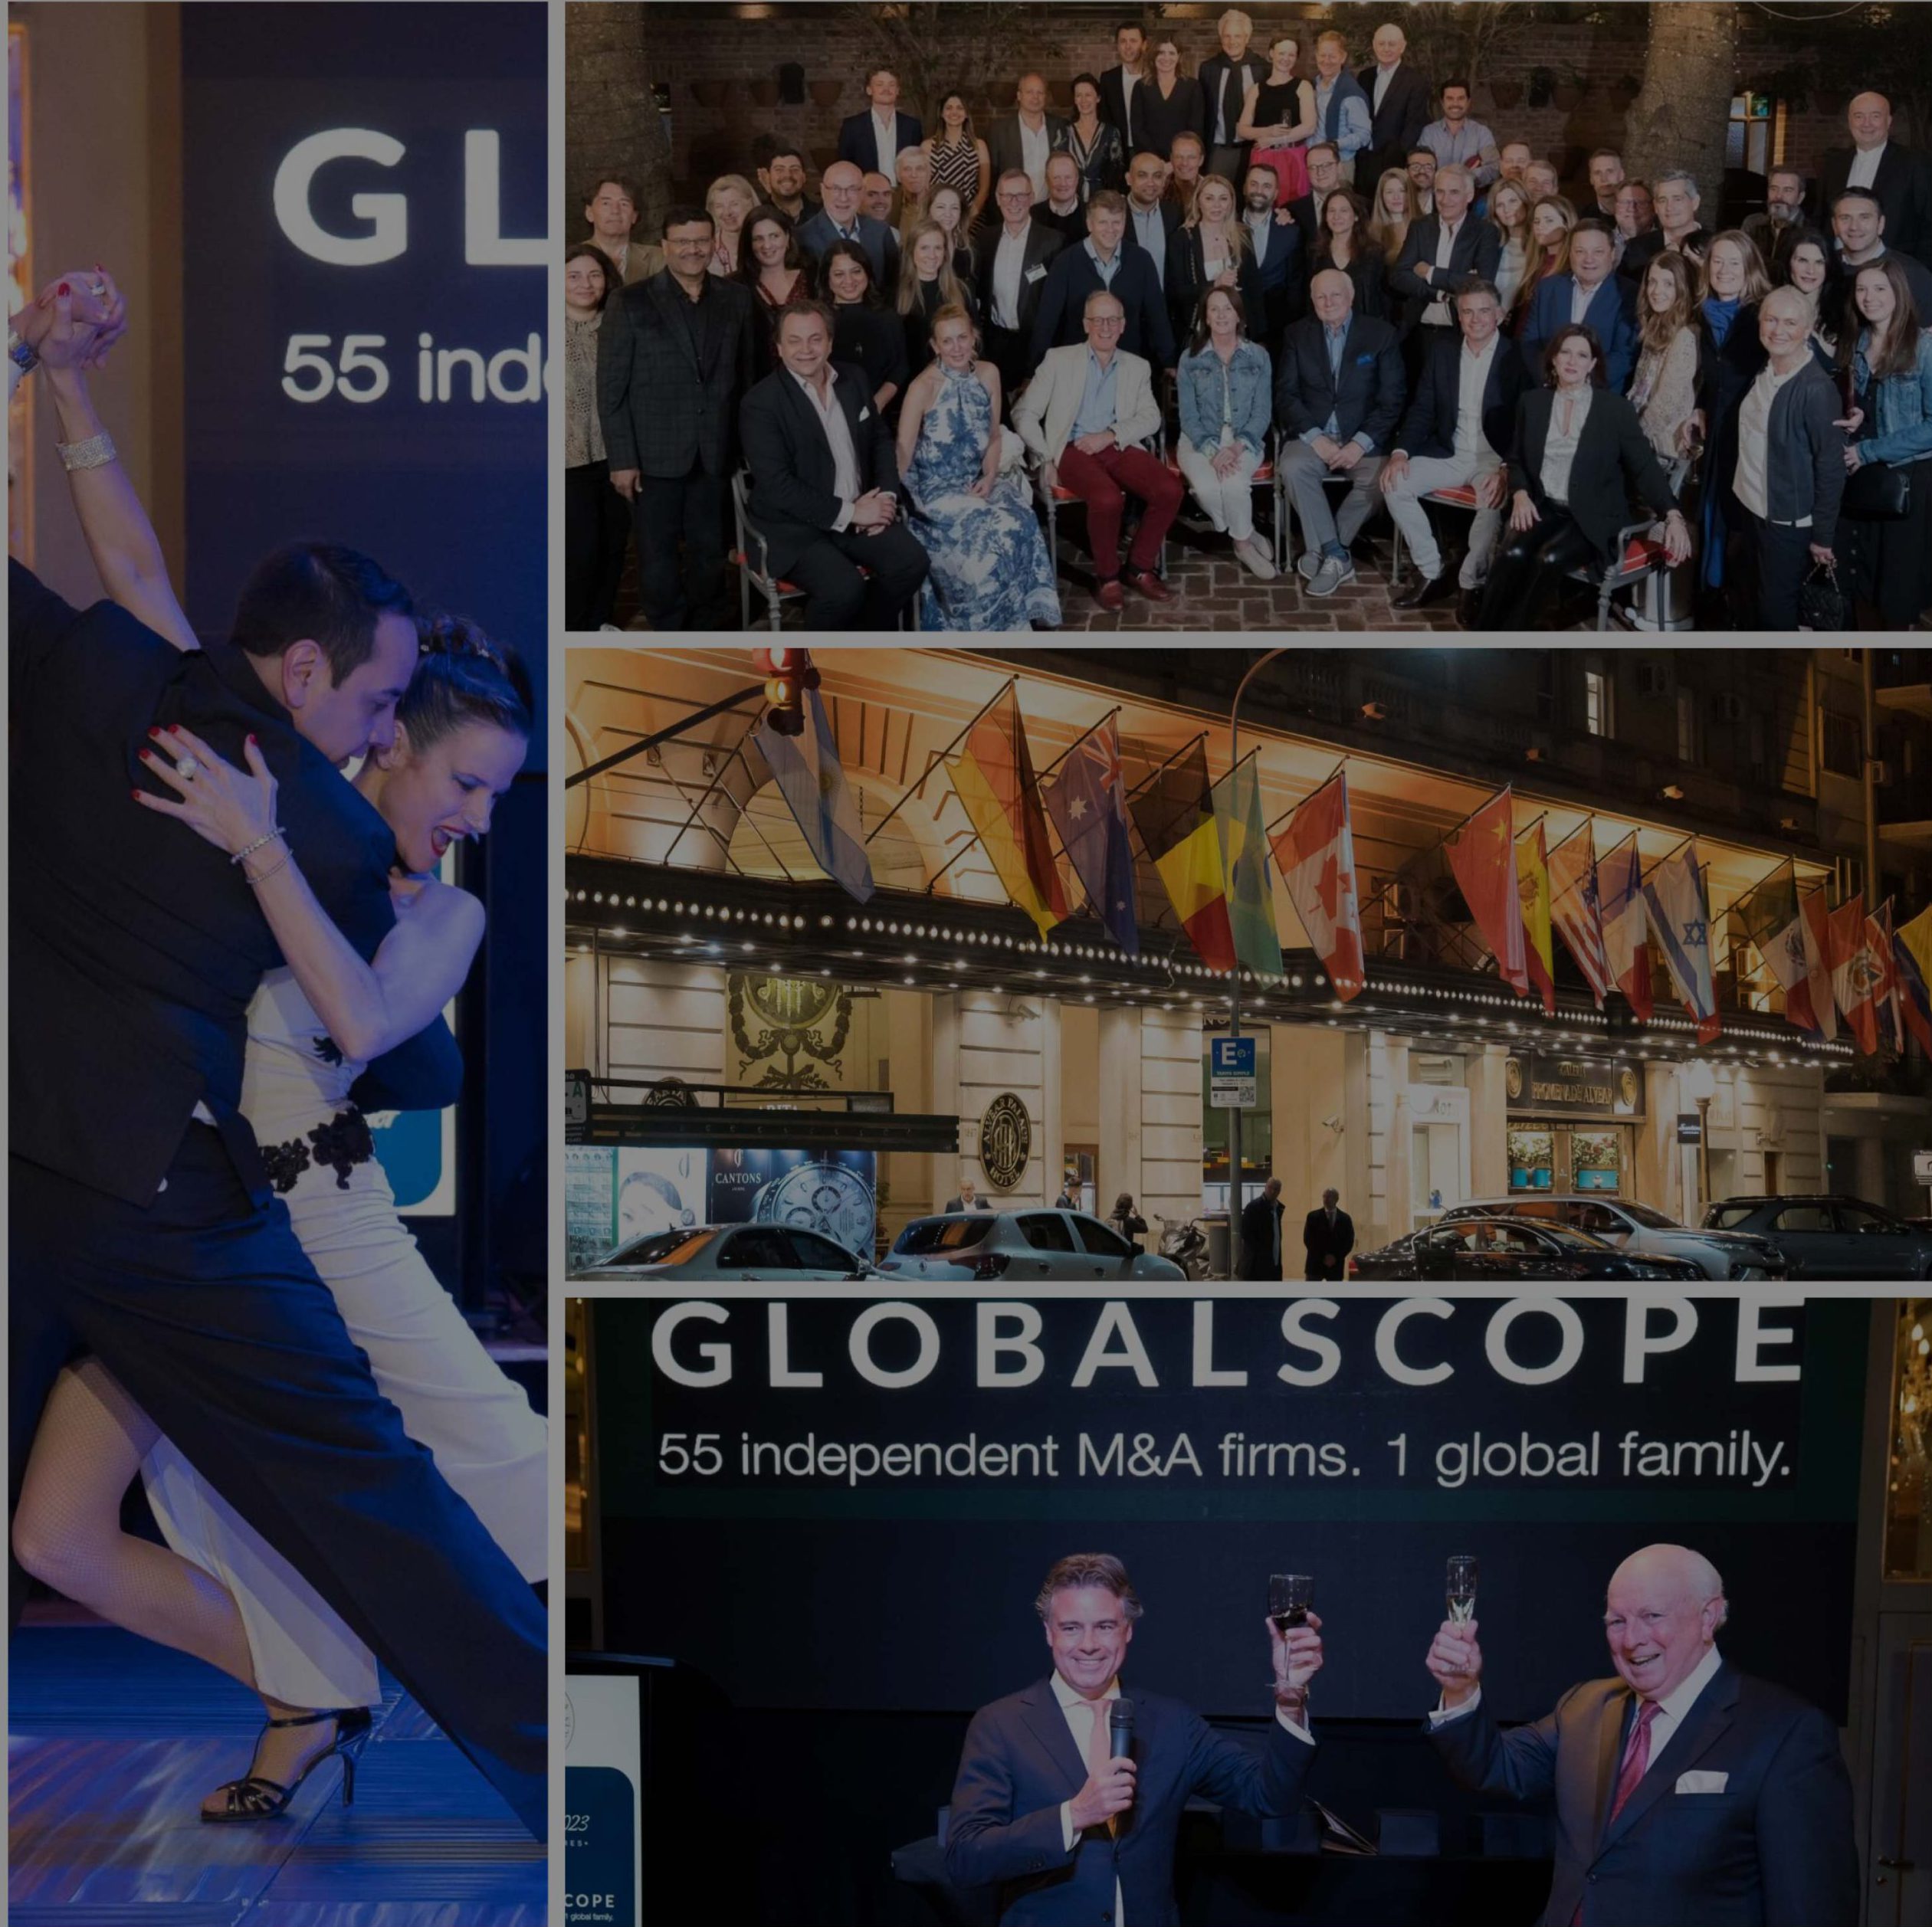 Martijn Peters named Globalscope President at conference in Buenos Aires; Globalscope adds new partners in New York, India and South Korea